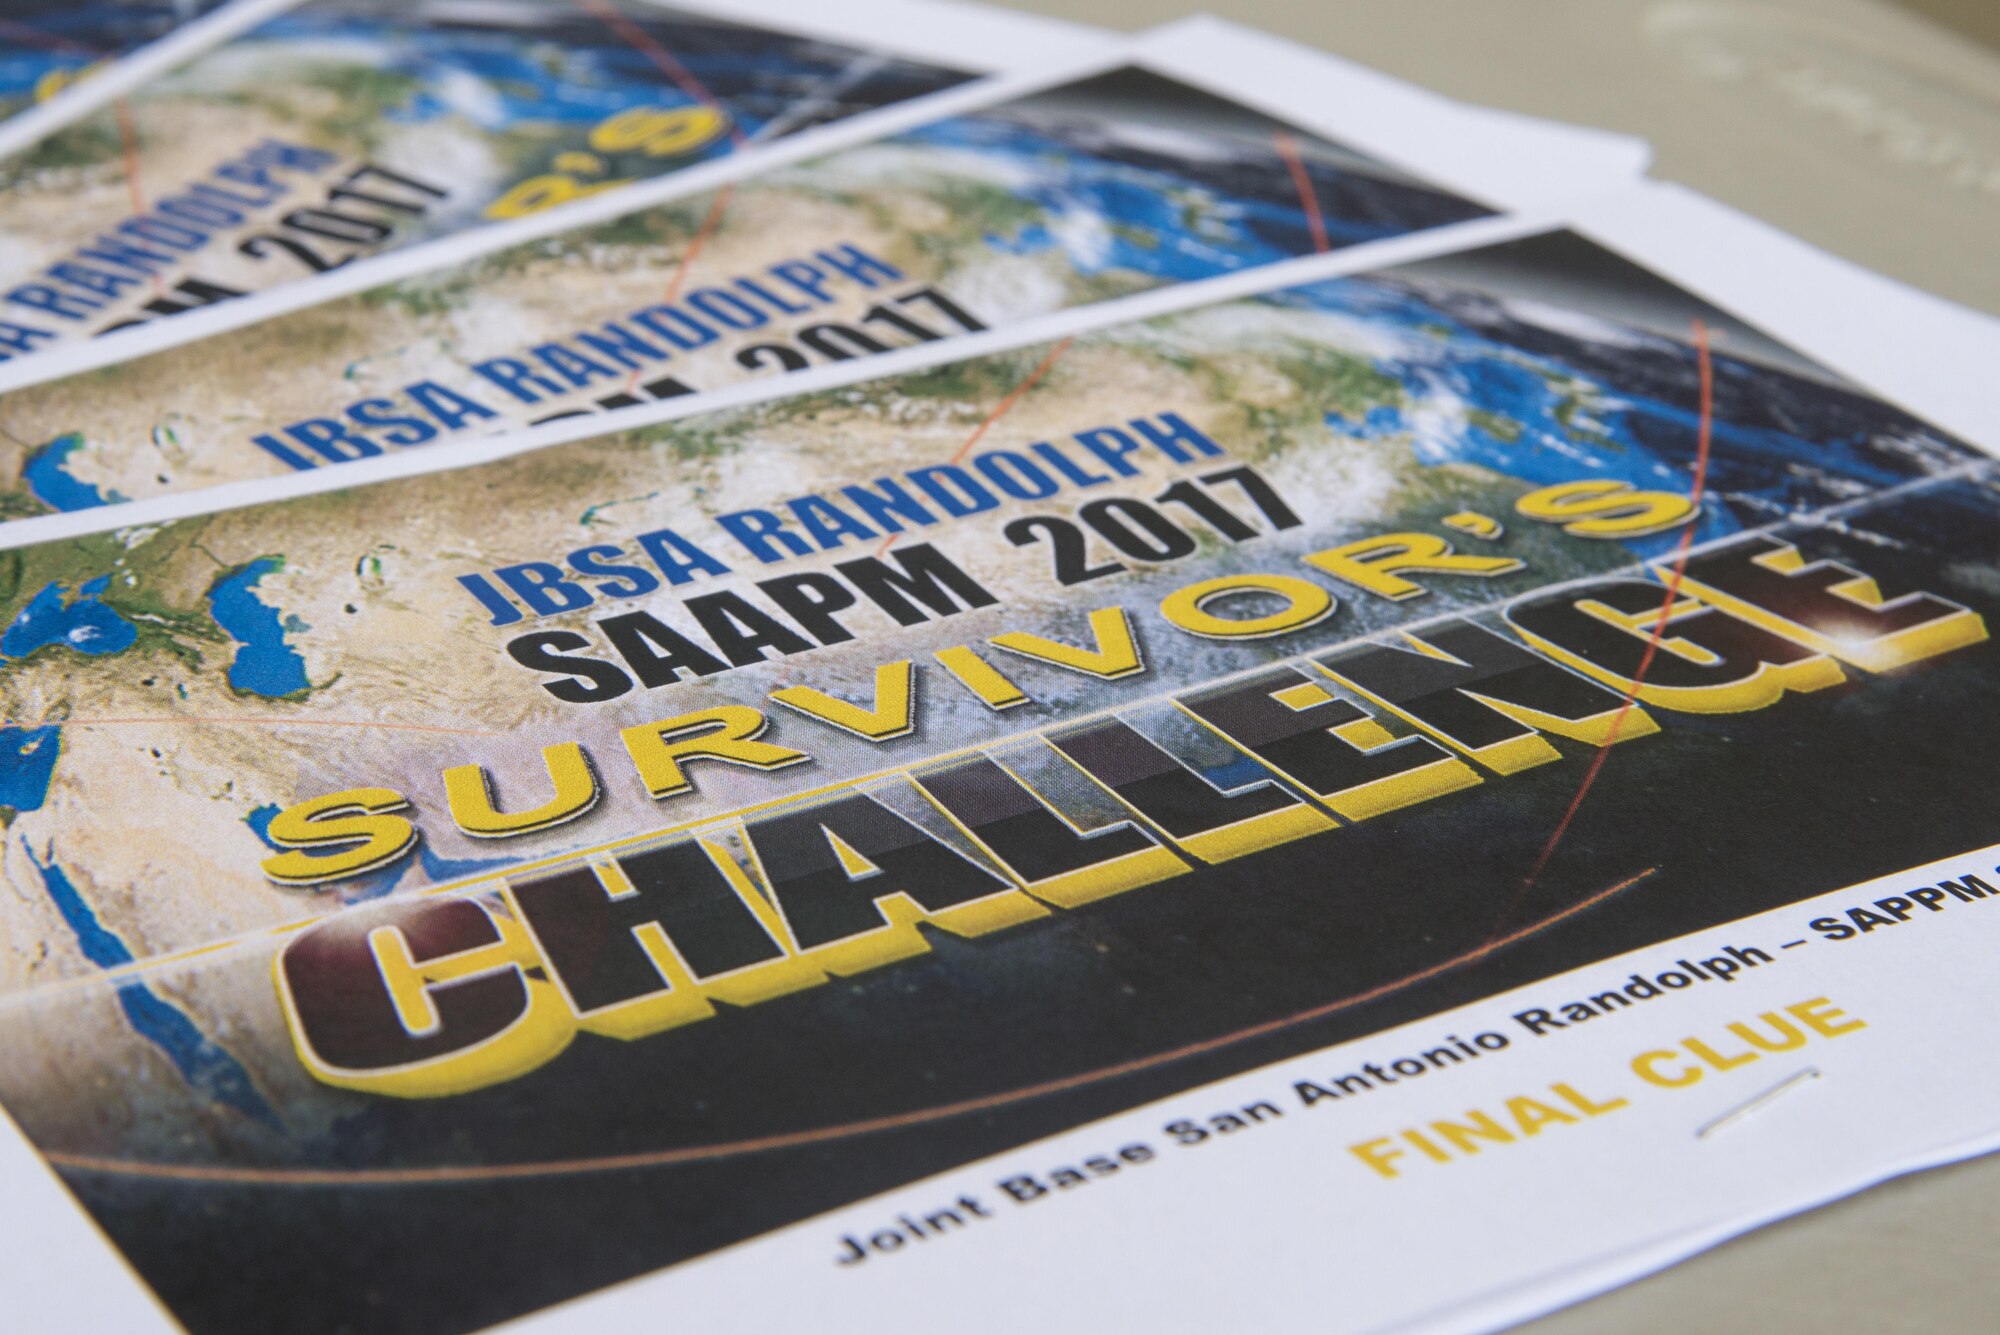 The final clue to the “Survivor’s Challenge” April 13, 2017, at Joint Base San Antonio-Randolph.  Survivor’s Challenge is a JBSA competition where teams compete in mental and physical challenges to help raise awareness and prevent sexual assault within the military and federal service.  (U.S. Air Force photo by Sean M. Worrell)